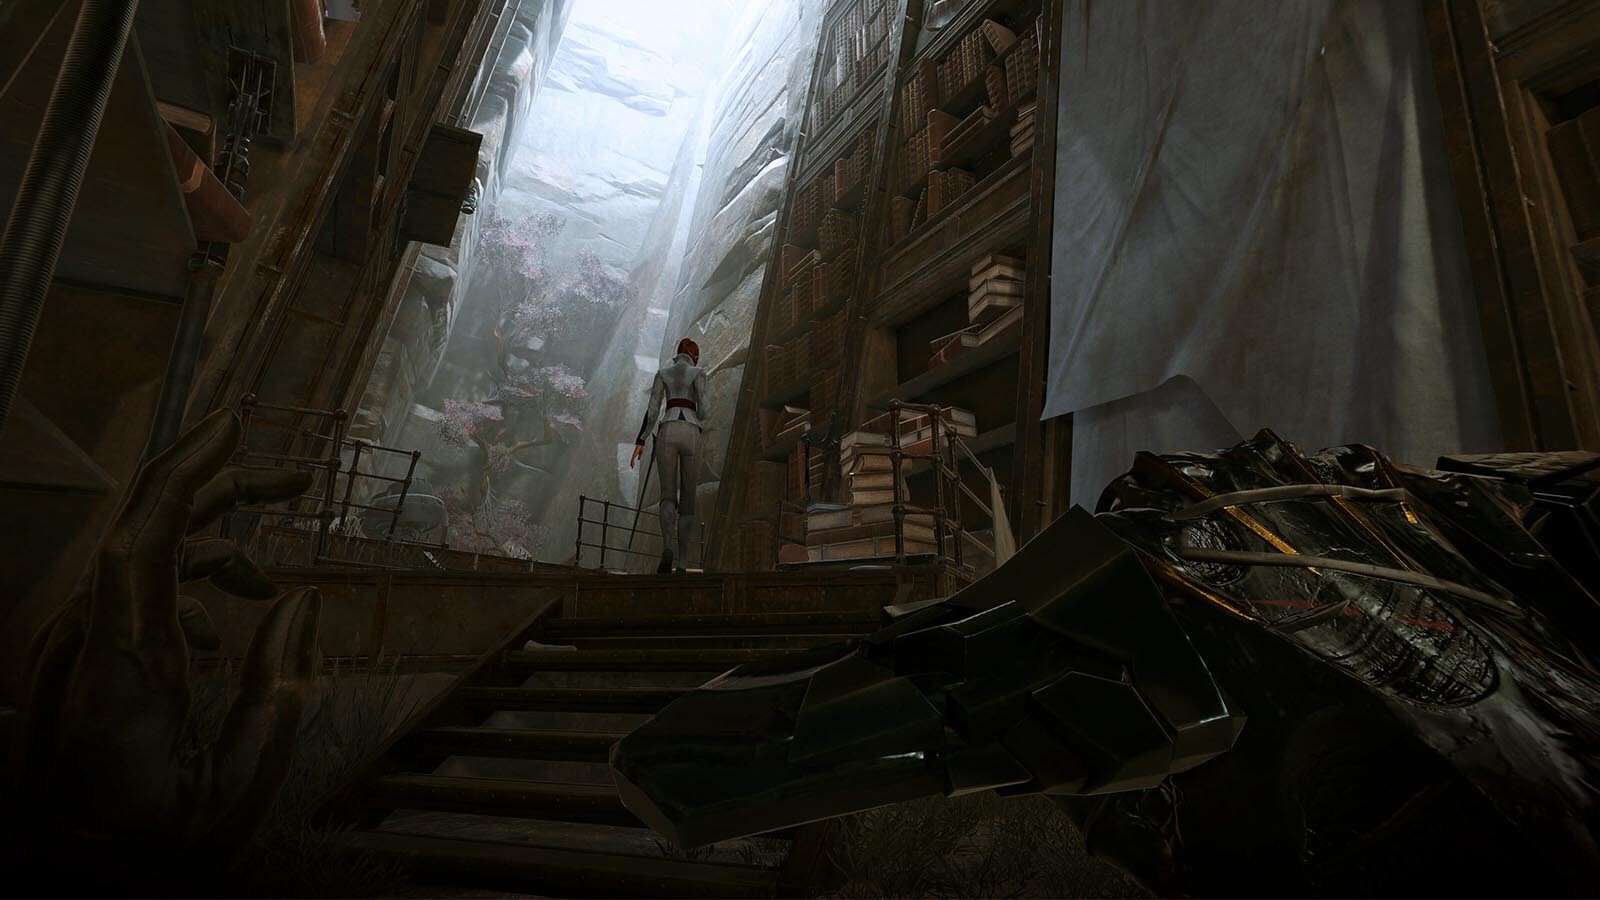 Dishonored 2's latest gameplay trailer highlights Corvo's killing abilities